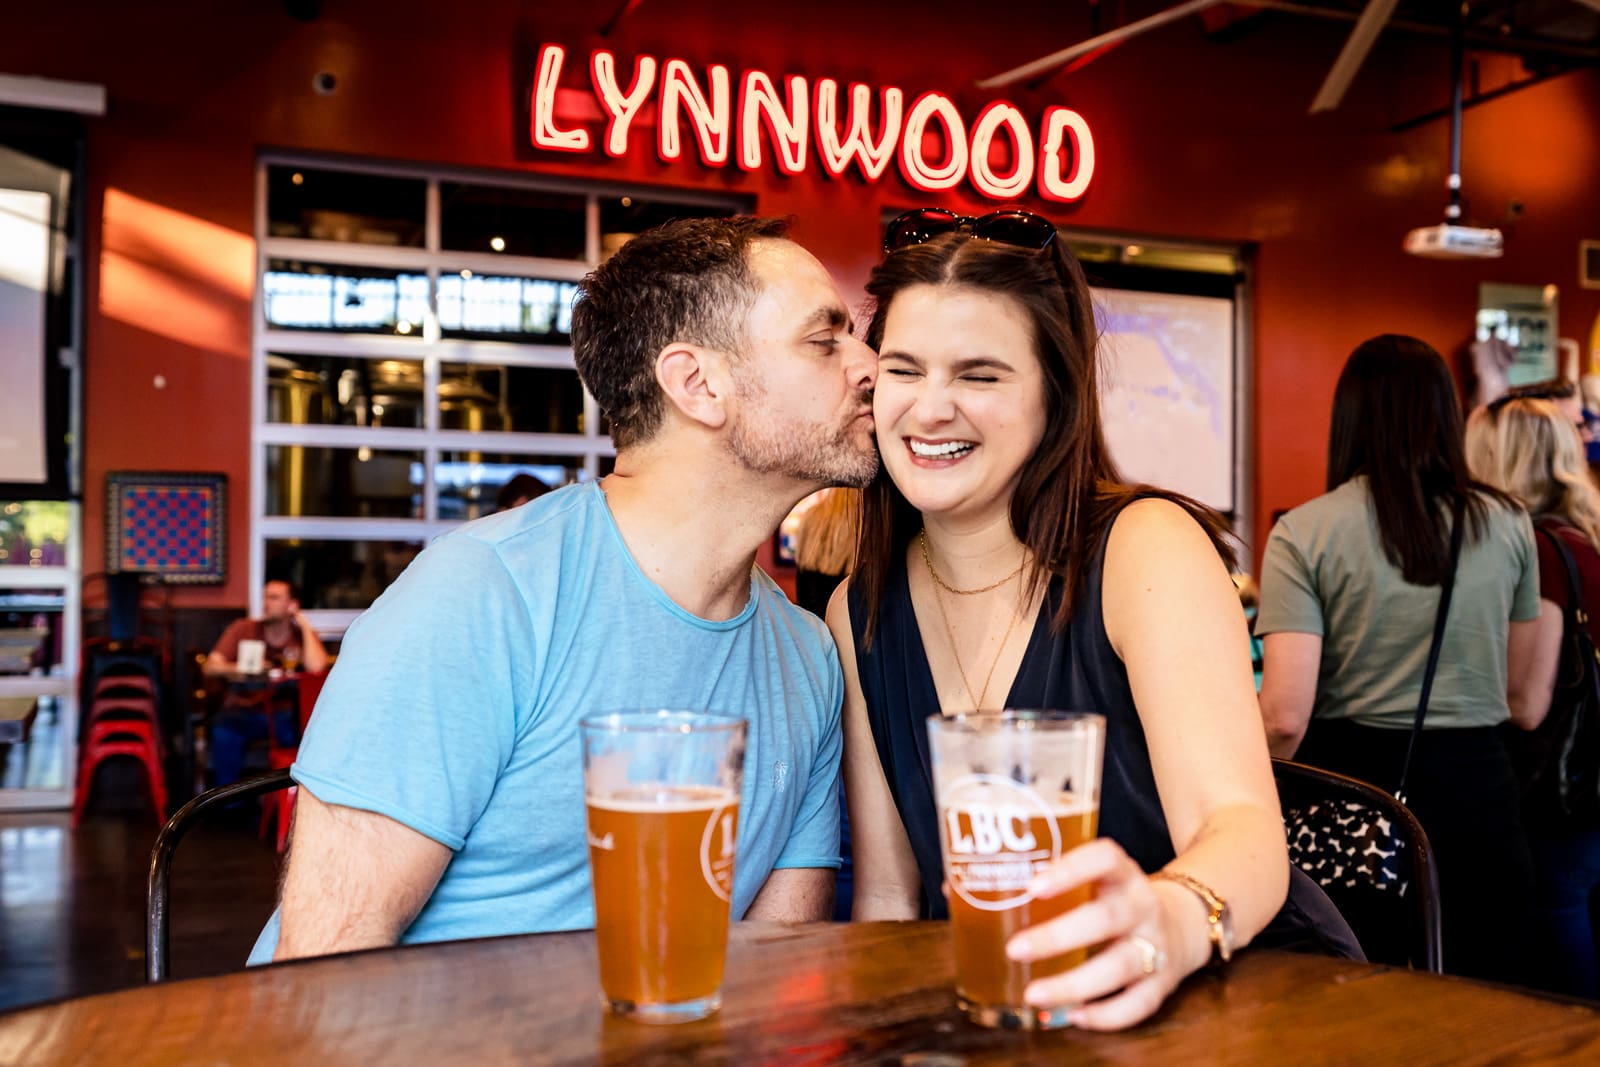 In front a neon sign at Lynwood Brewing Concern in Raleigh, NC a man kisses a woman while she laughs